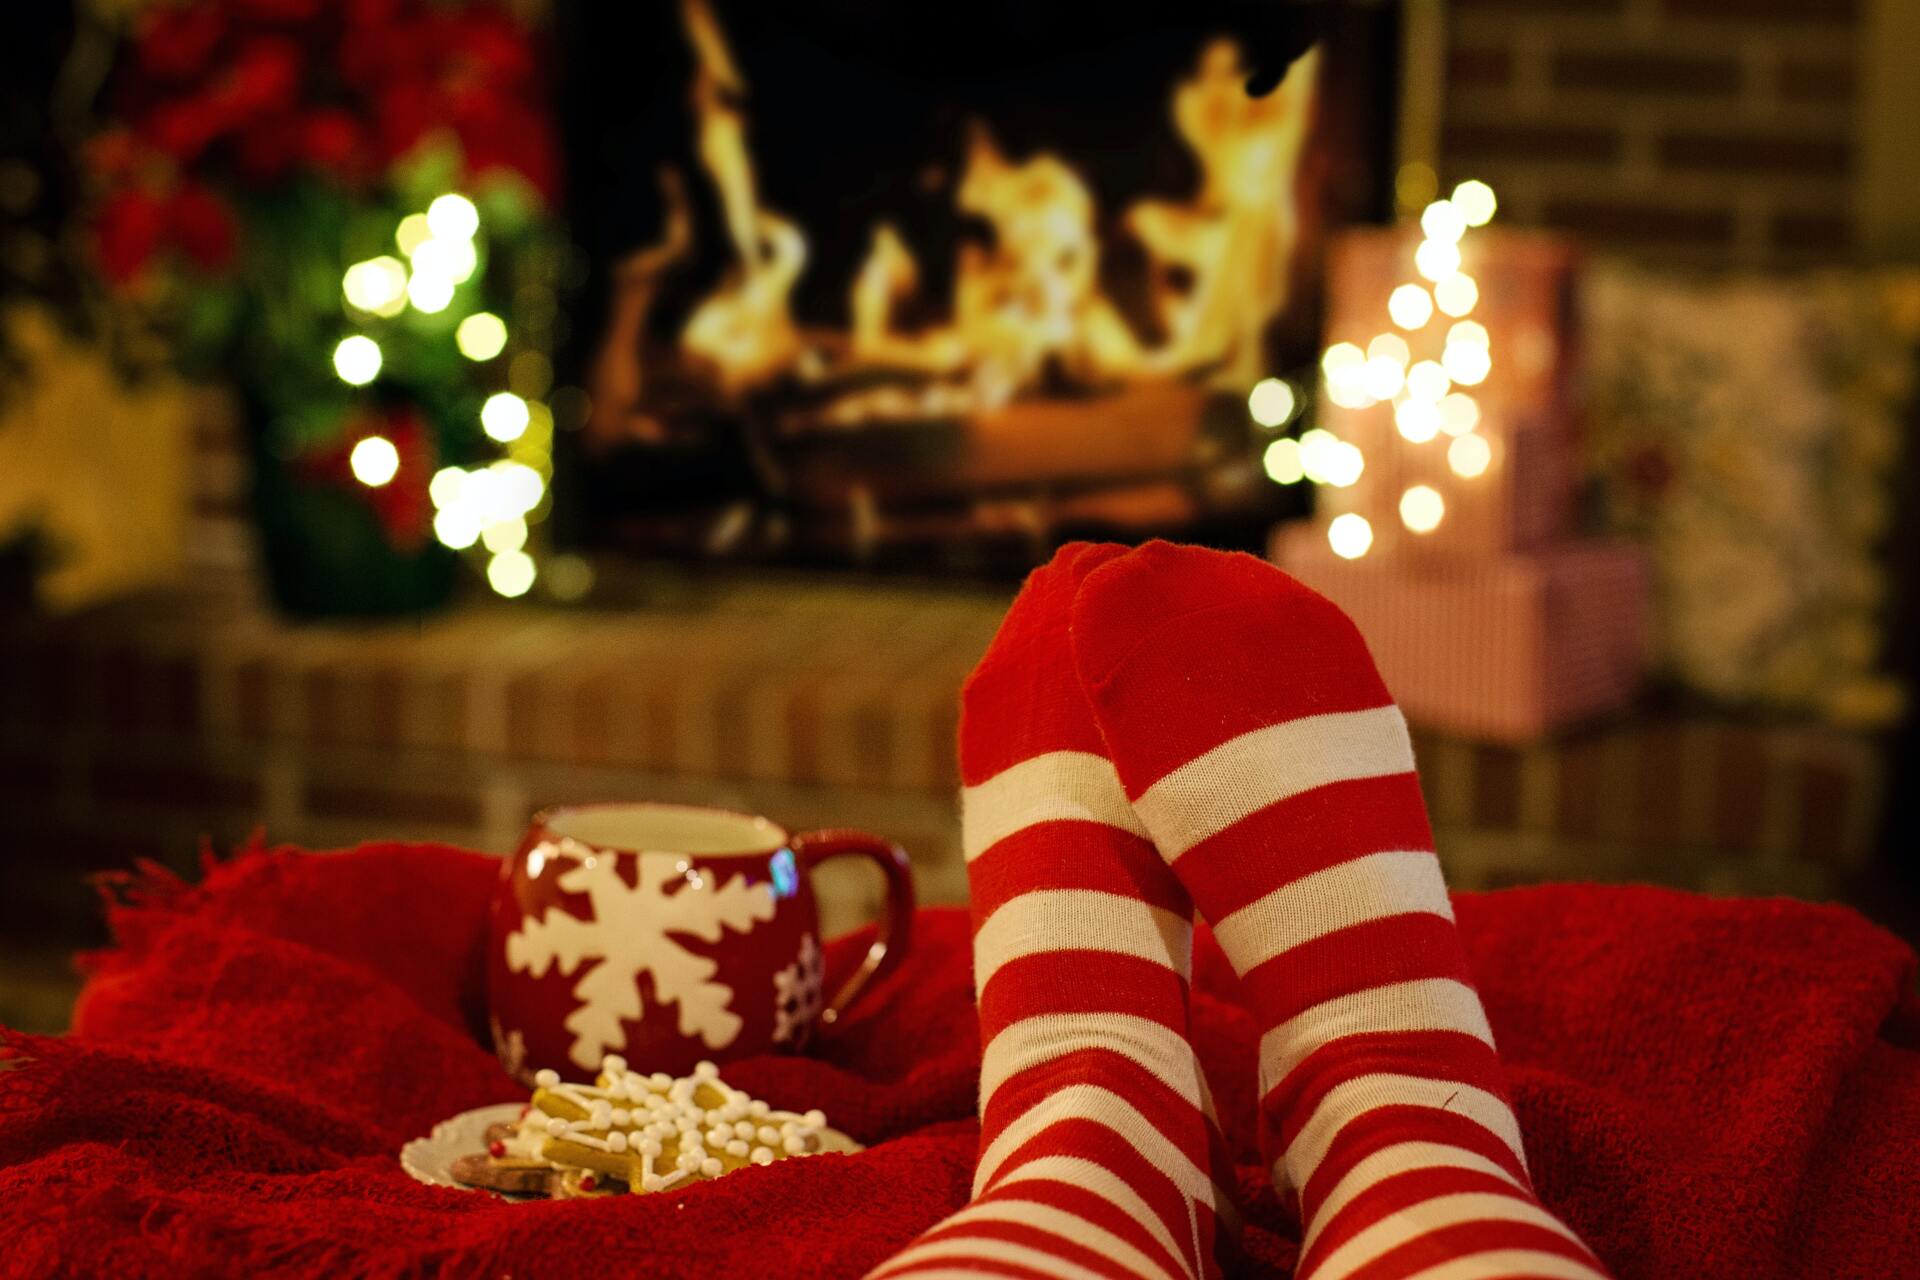 Photo of stockinged feet by fireplace